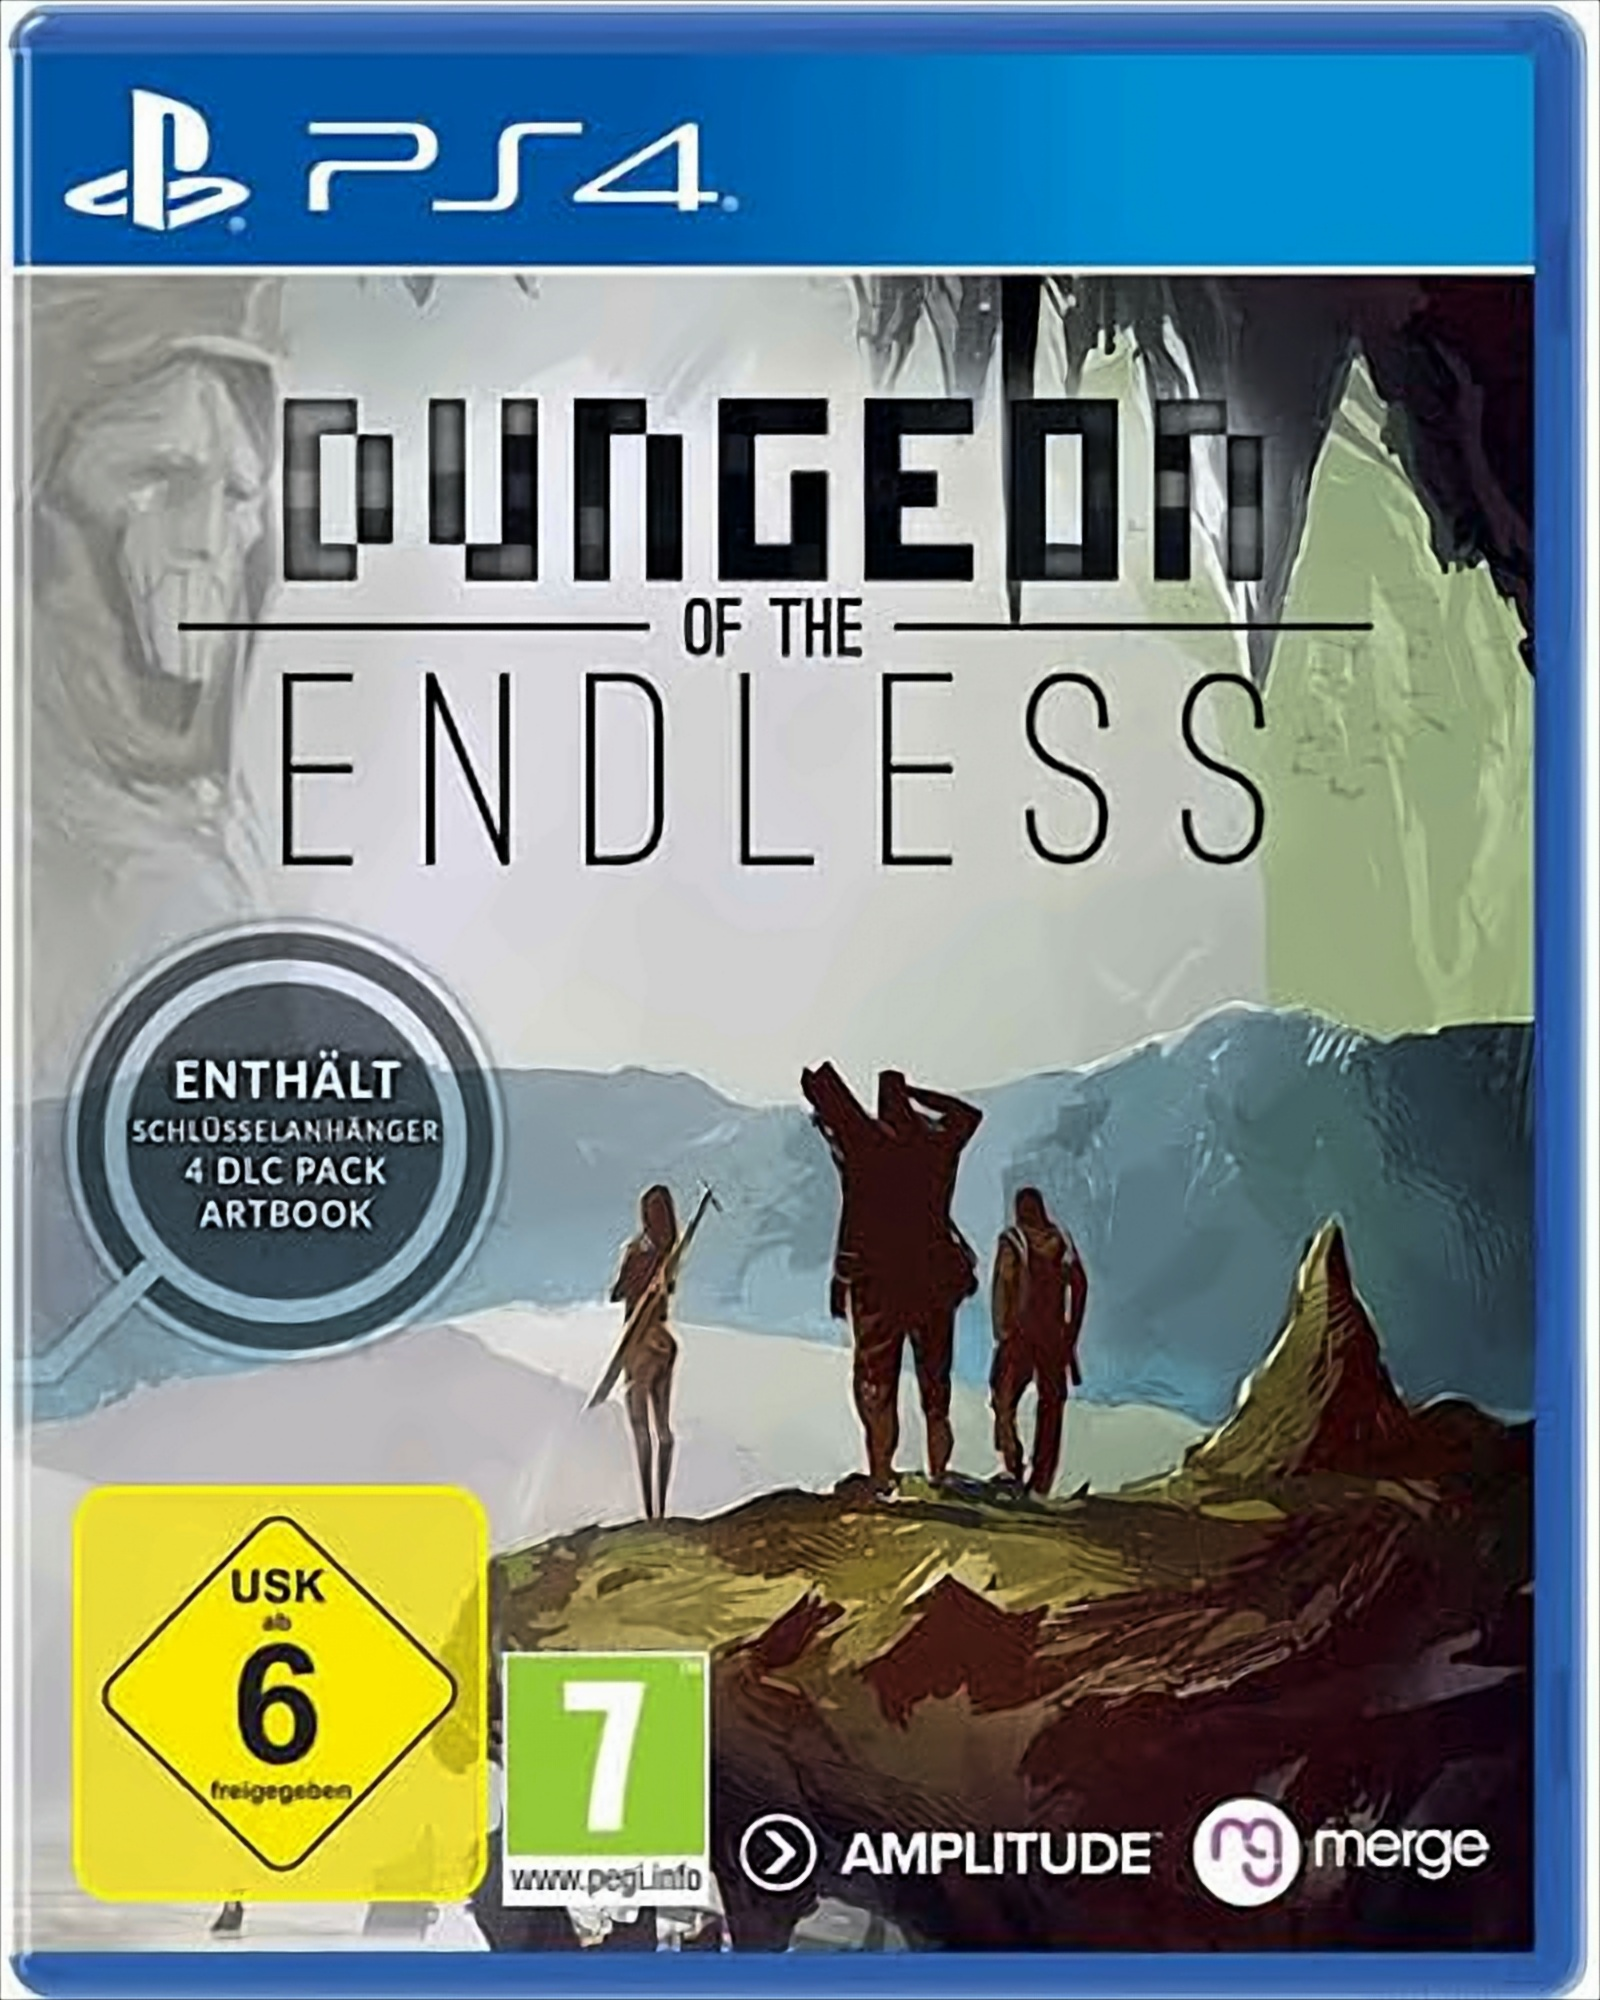 - [PlayStation Endless Collectors Dungeon PS-4 of 4]